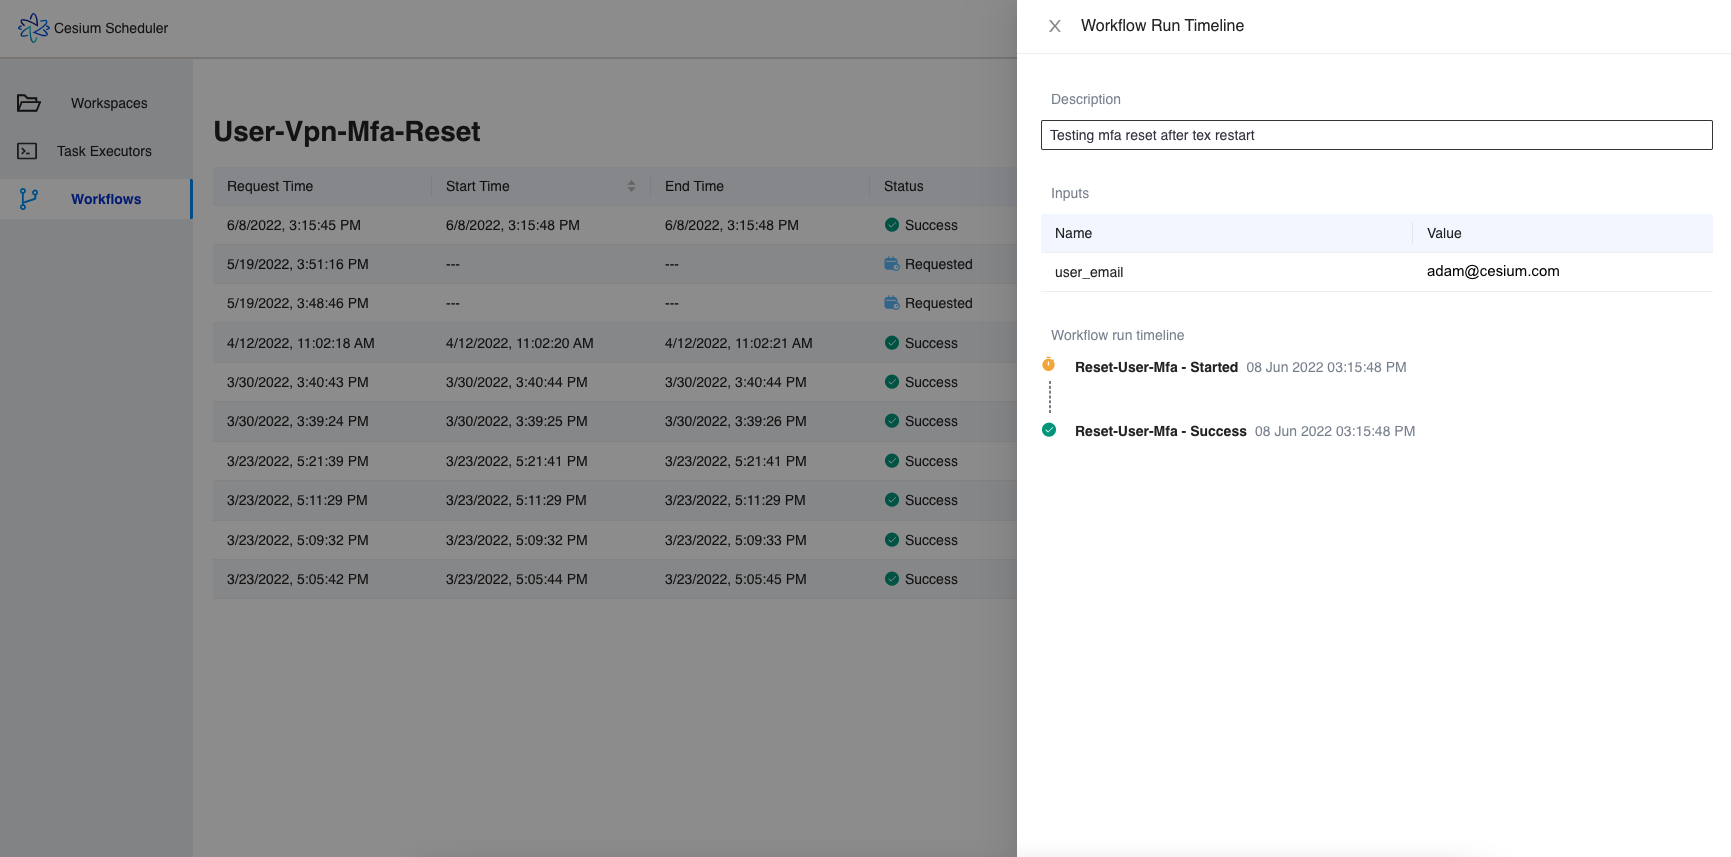 View workflow run history and see a timeline of individual tasks in the workflow.